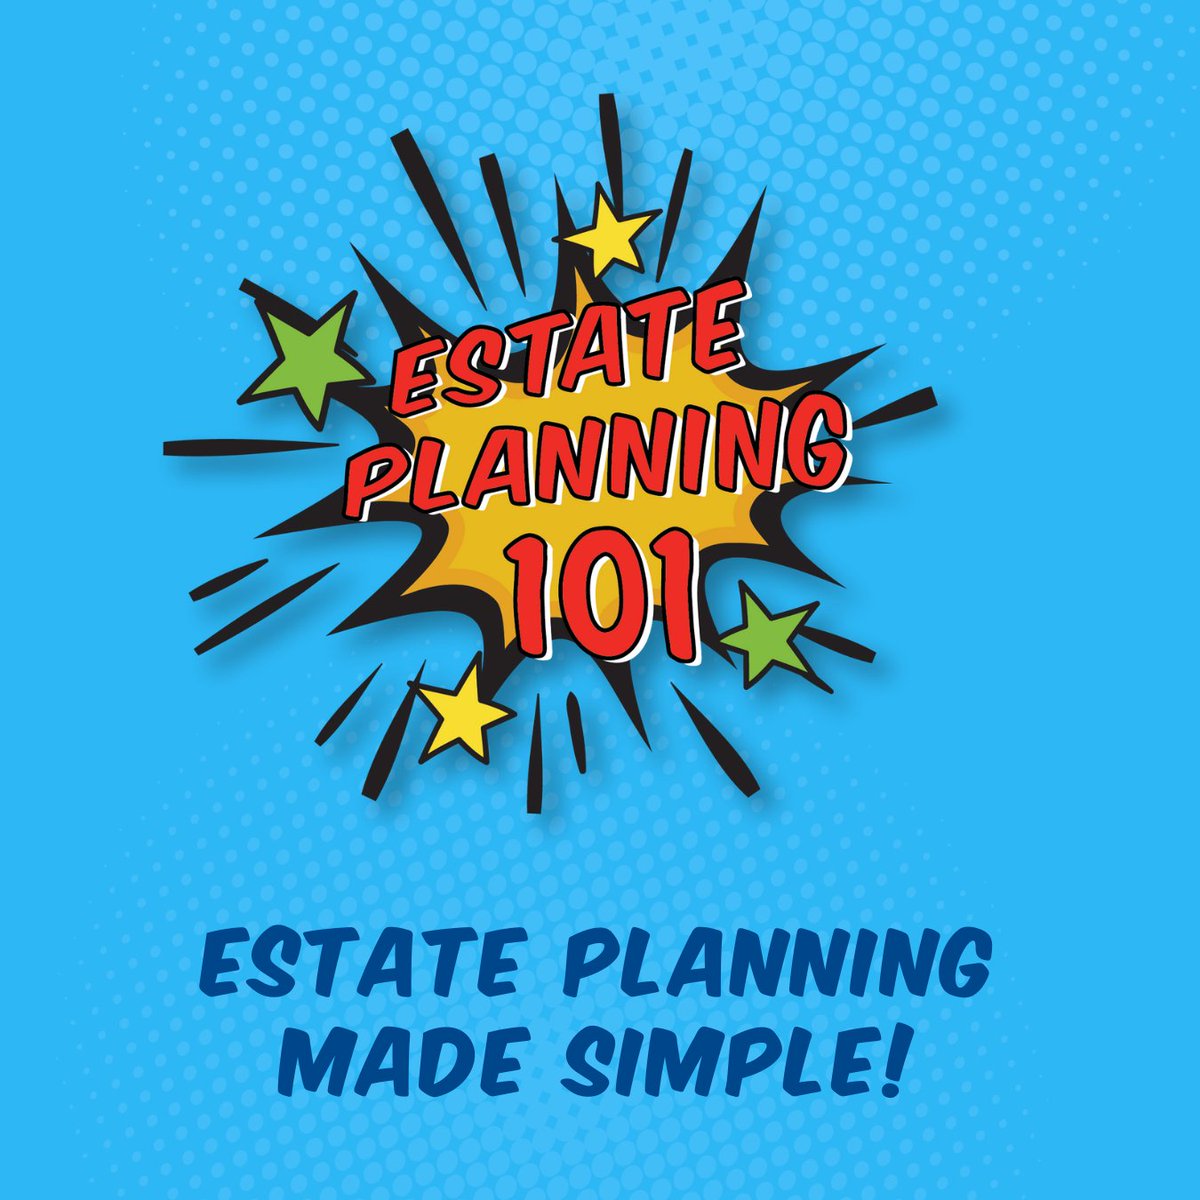 Join us on October 11th from 2-3 p.m. or 7-8 p.m. for a webinar to educate yourself on estate planning. Register for the afternoon or evening session here: alzeducate.ca/course/index.p…